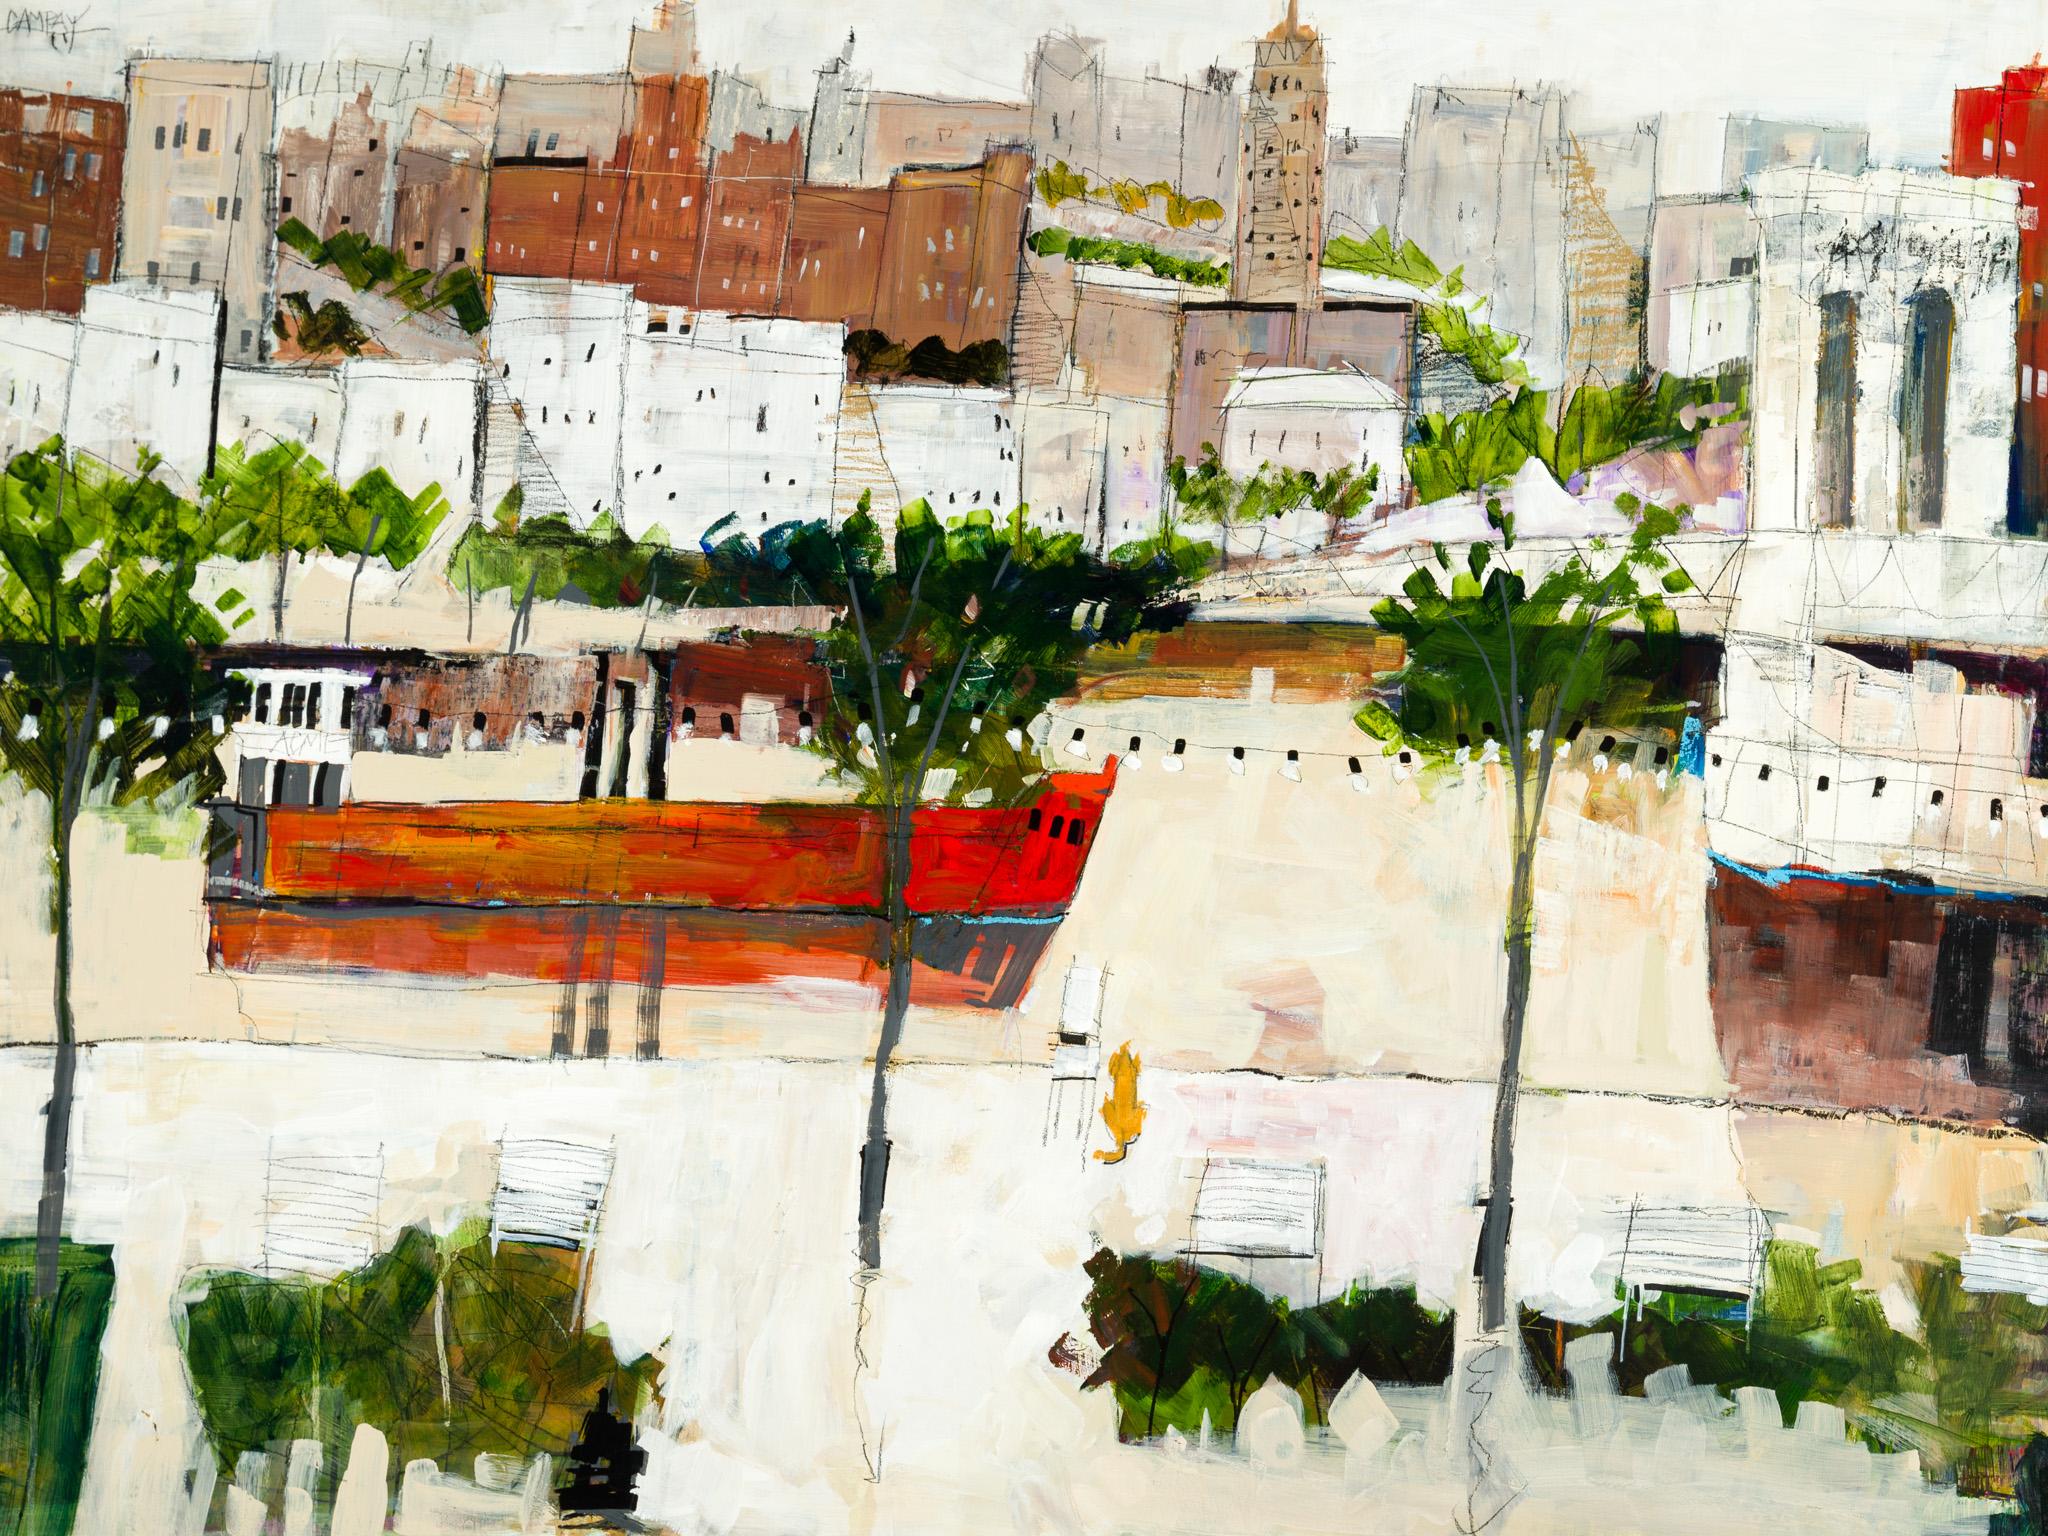 Brooklyn Tankers - Painting by Dennis Campay